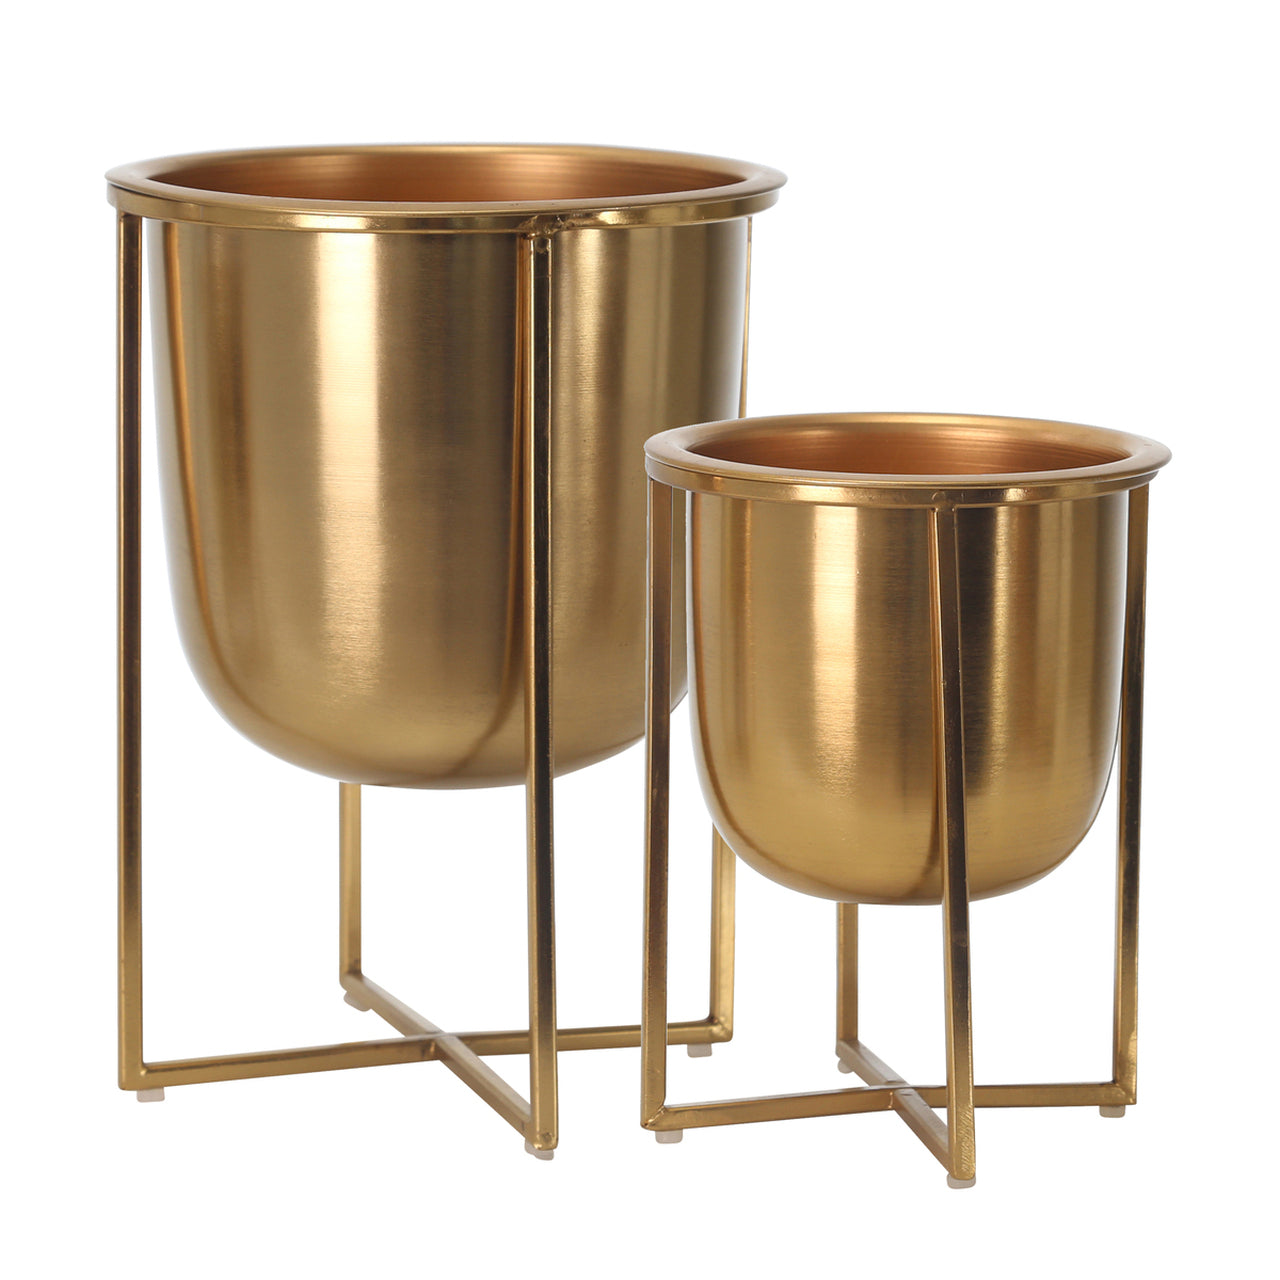 METAL PLANTERS ON STANDS/2